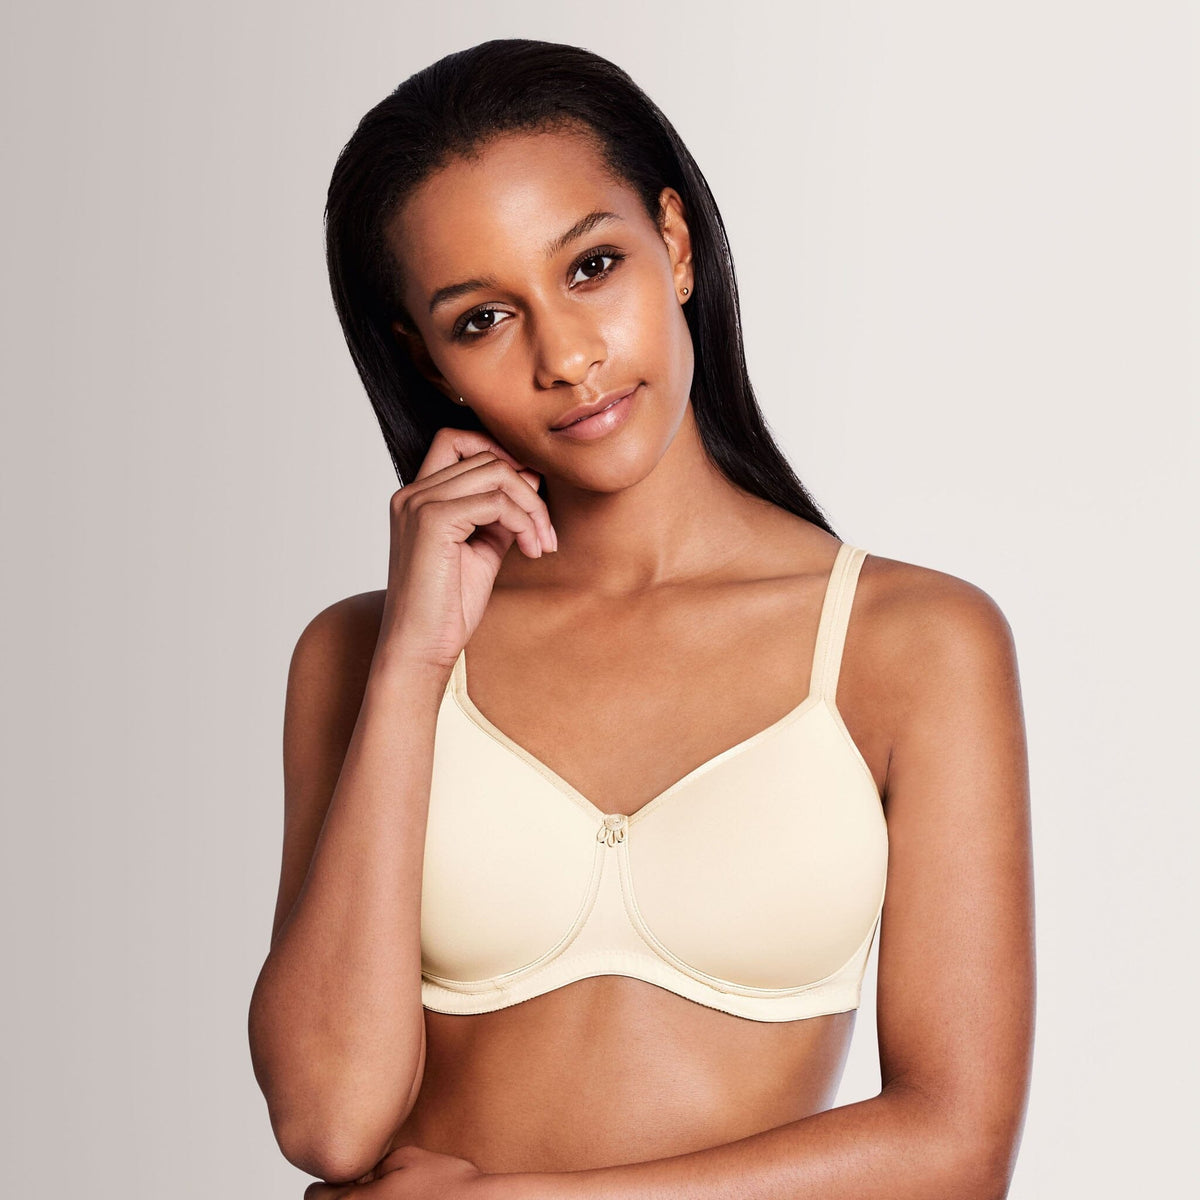 Nearly Me Women's Postsurgical Satin Cup Bra 44D Beige 